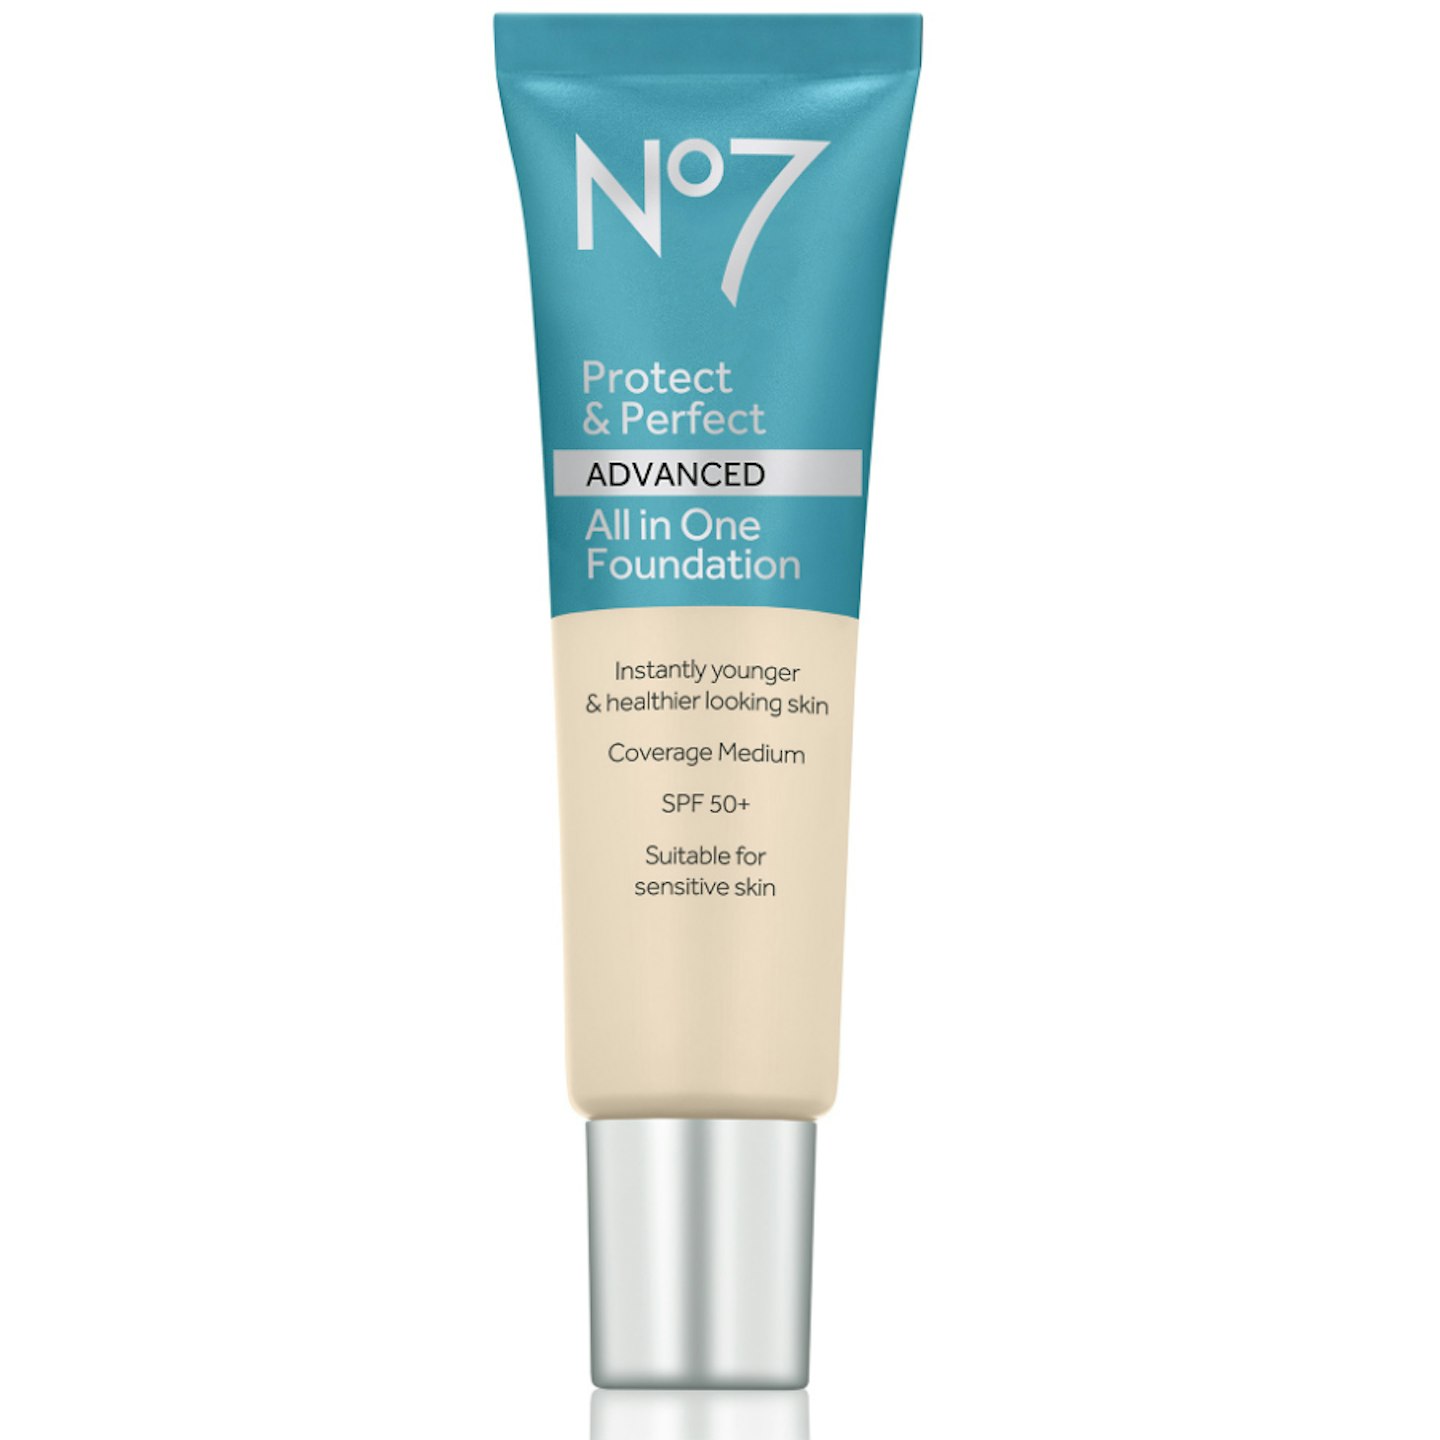 No7 Protect & Perfect ADVANCED All in One Foundation